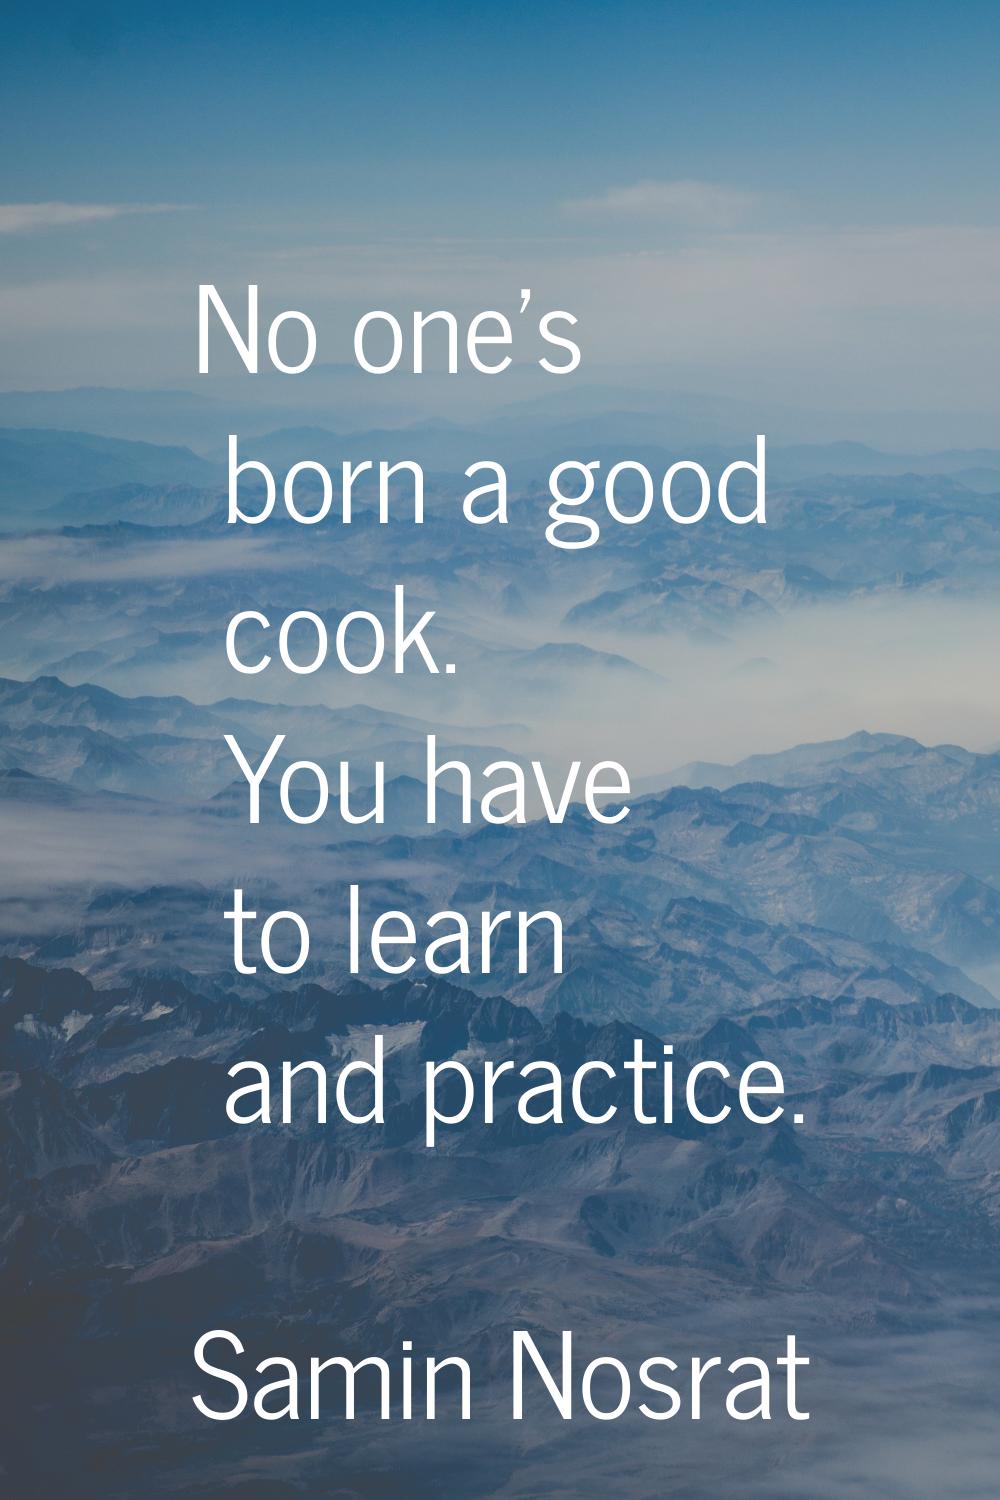 No one's born a good cook. You have to learn and practice.